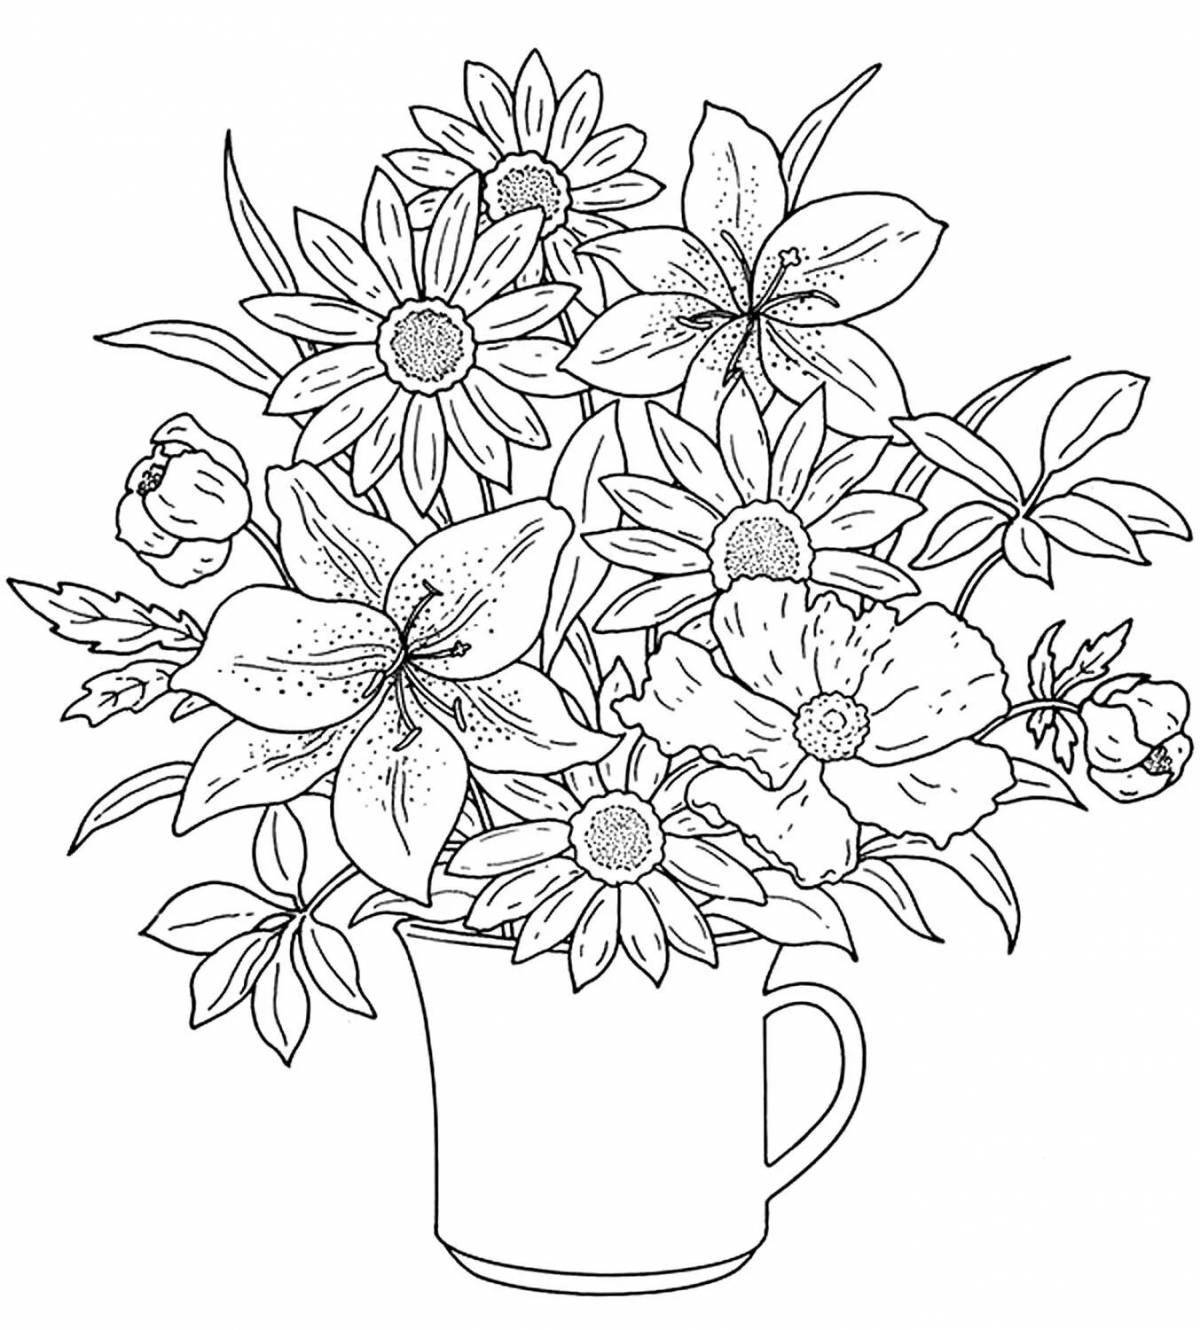 Delightful big flowers in a vase coloring book